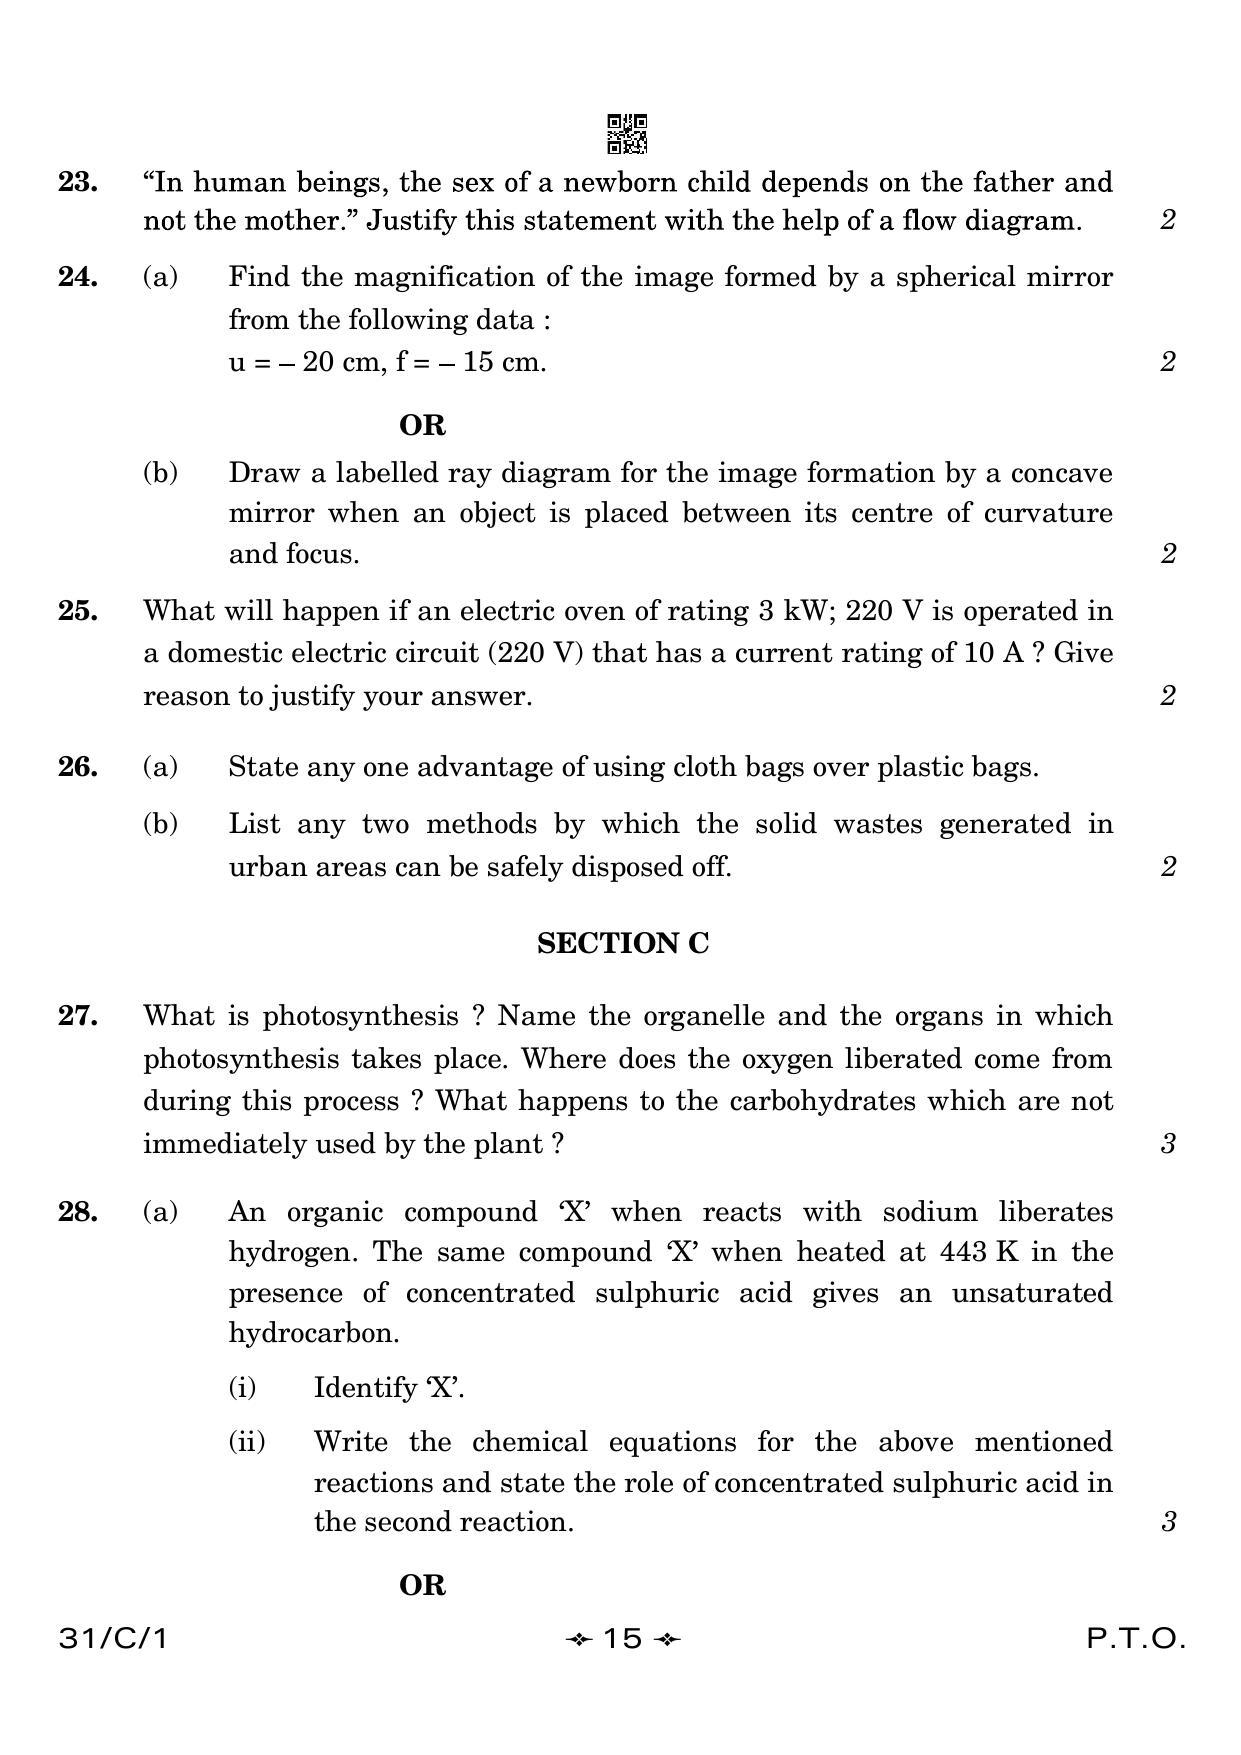 CBSE Class 10 31-1 Science 2023 (Compartment) Question Paper - Page 15